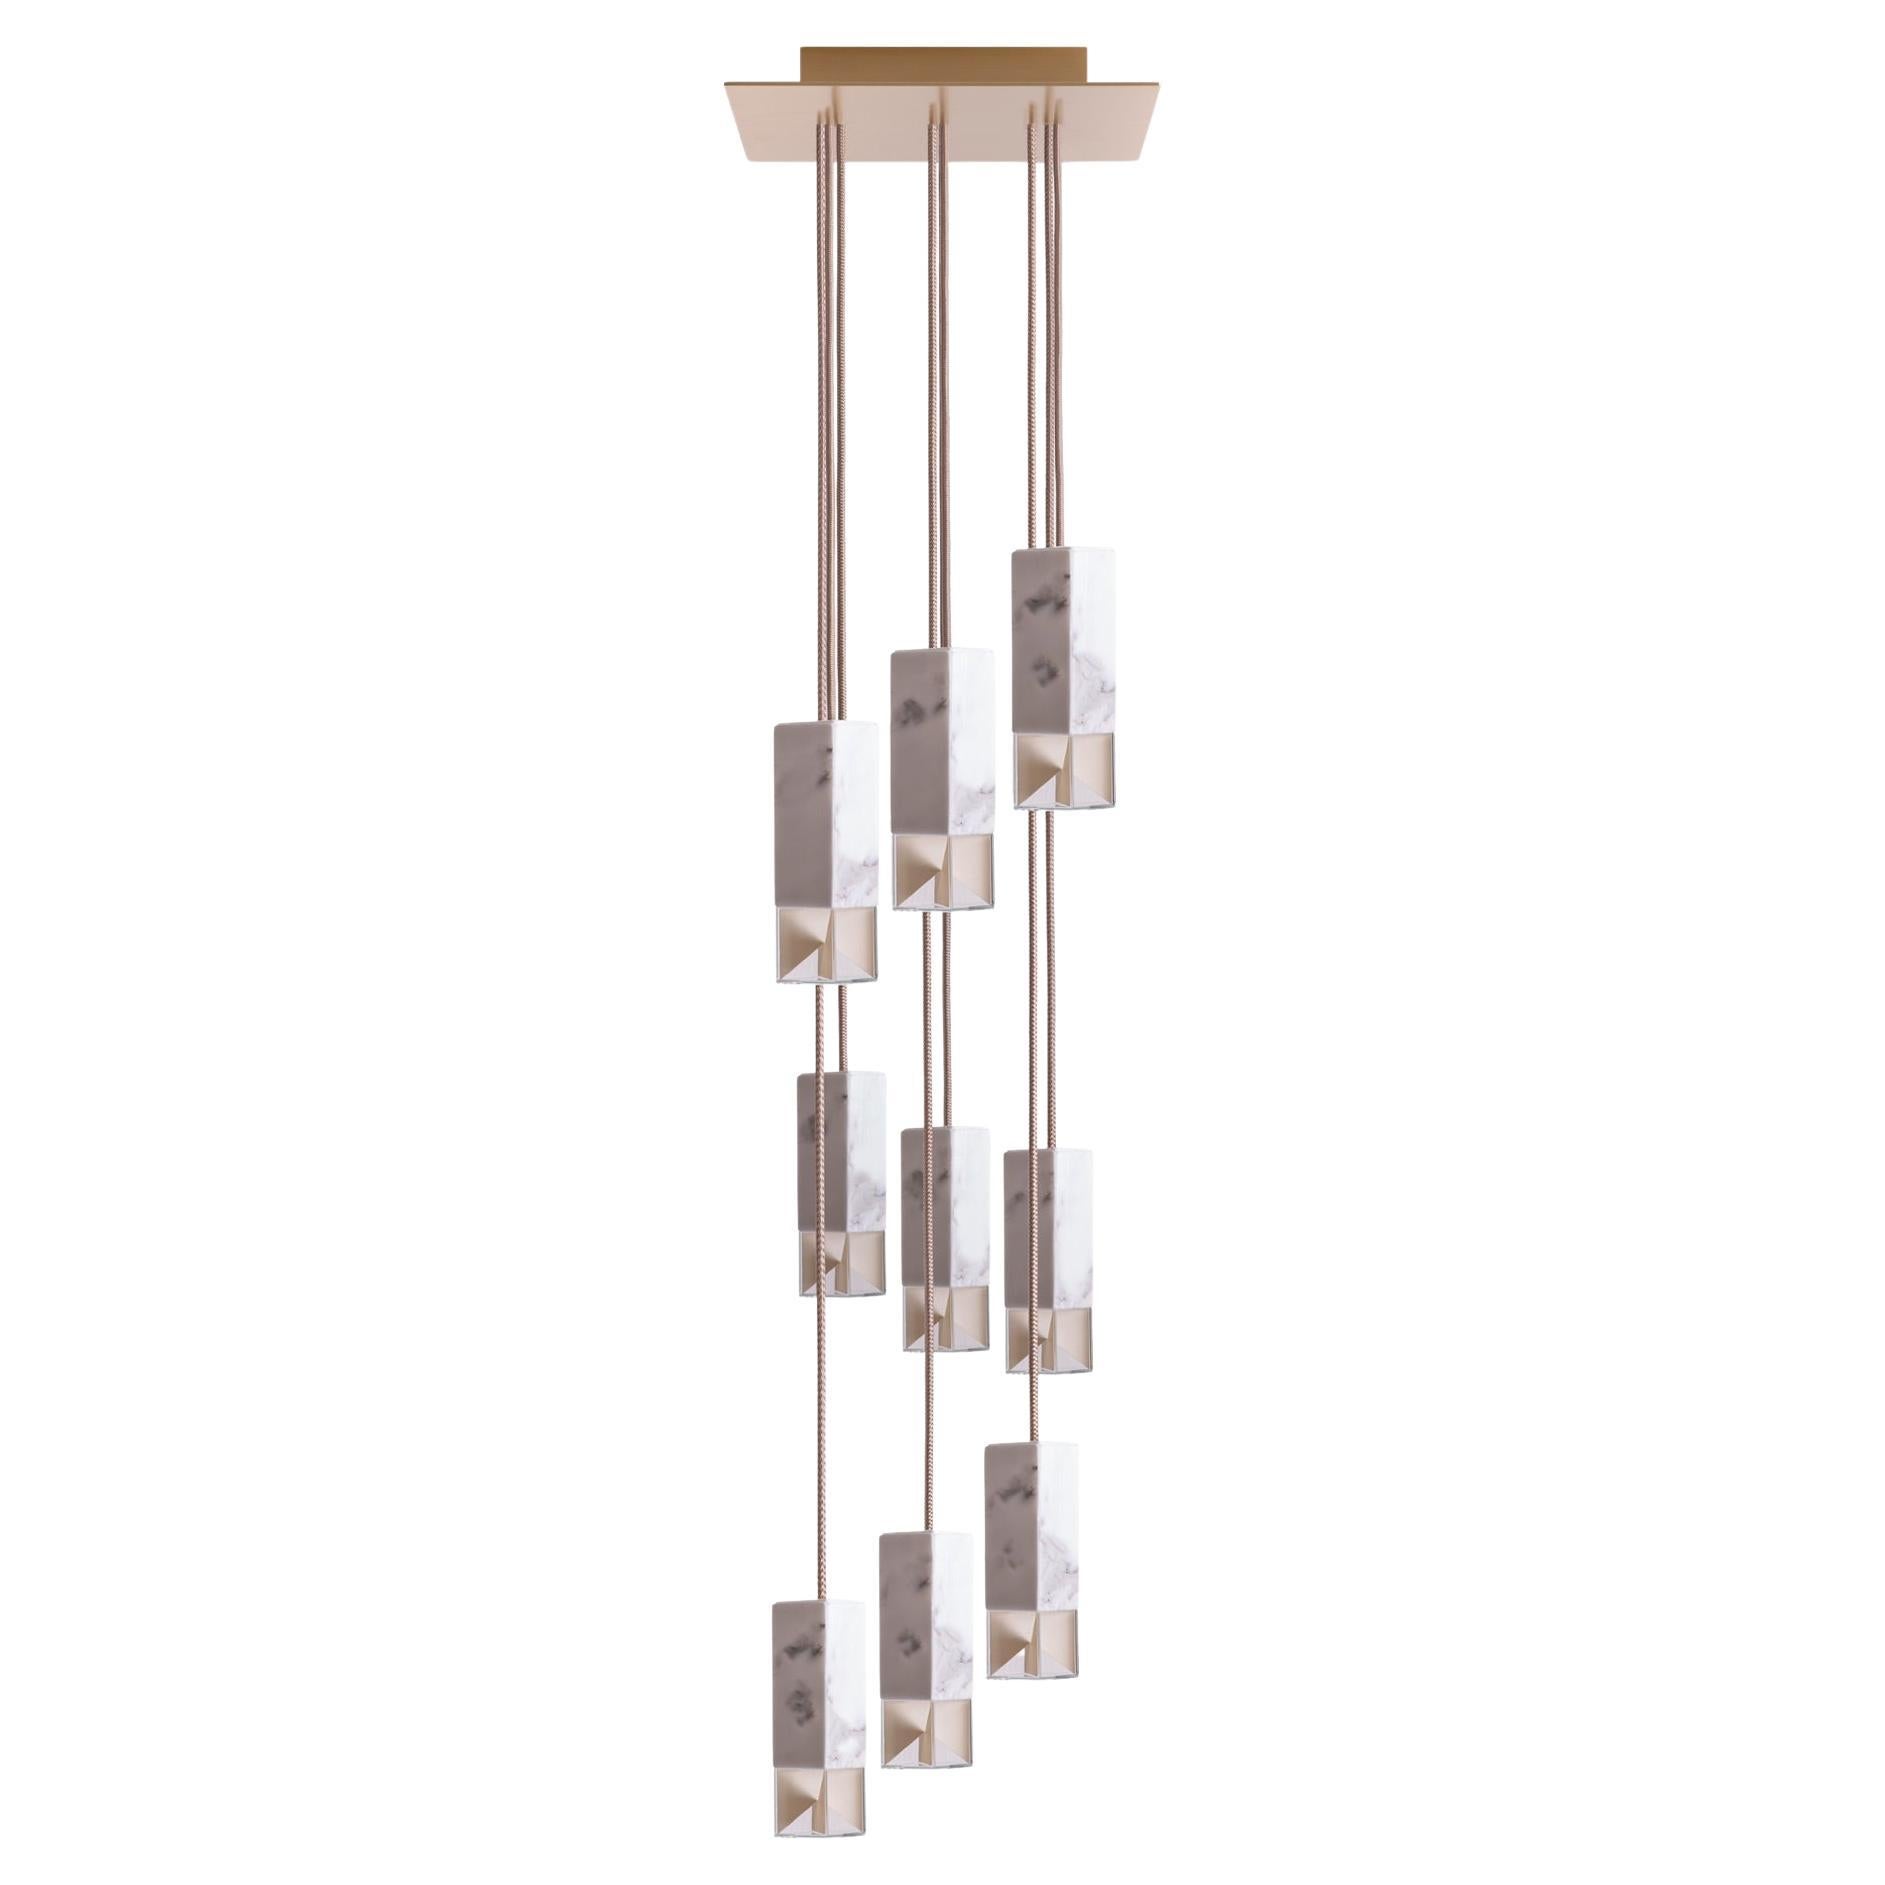 Ceiling Lamp 9 Light Chandelier Calacatta Marble Italy Handmade by Formaminima For Sale